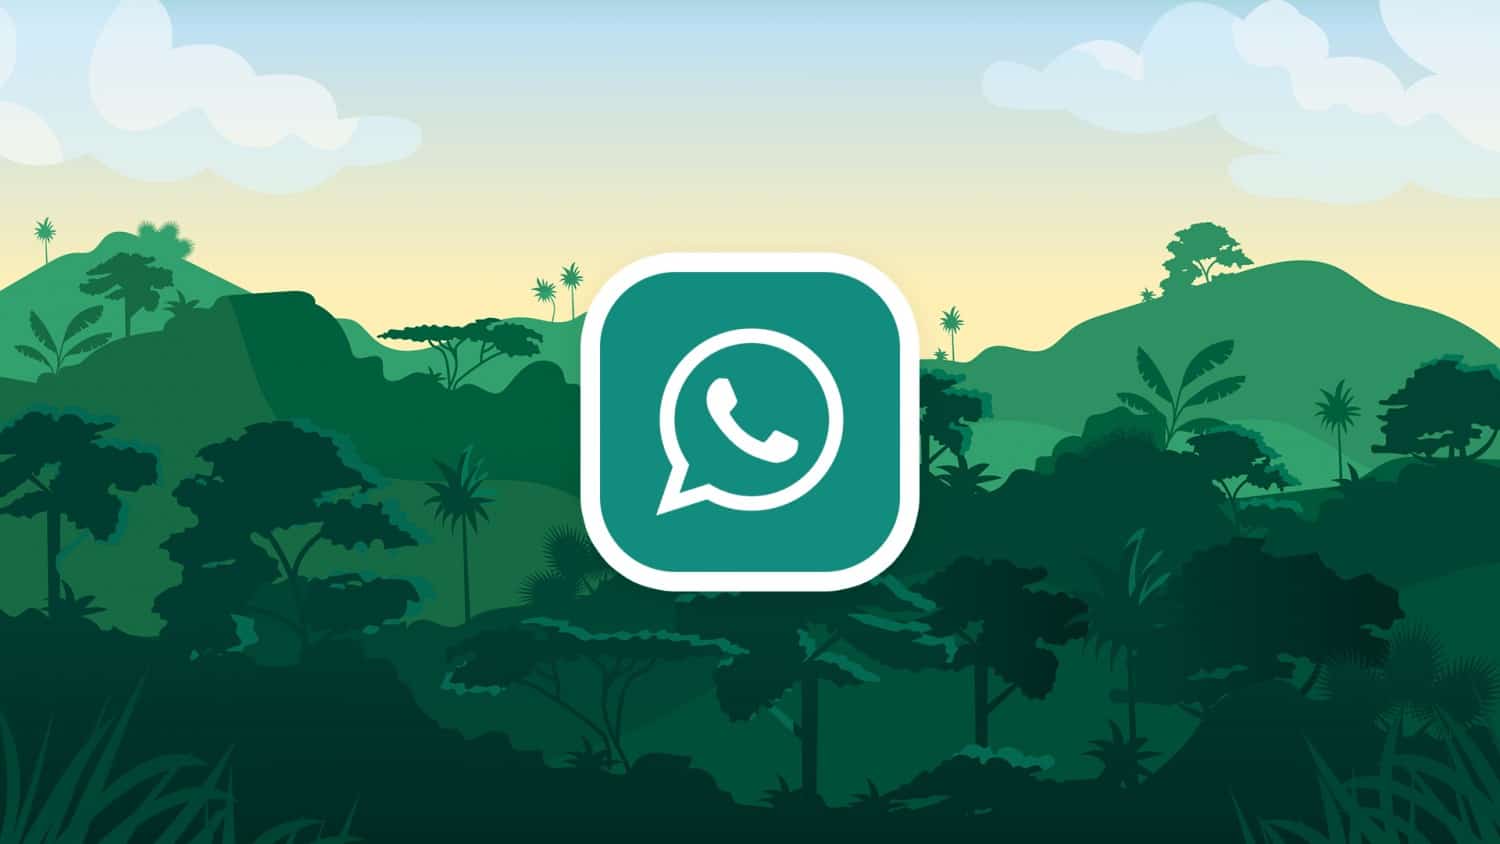 Download GBWhatsApp Pro v17.20 APK For Android Devices